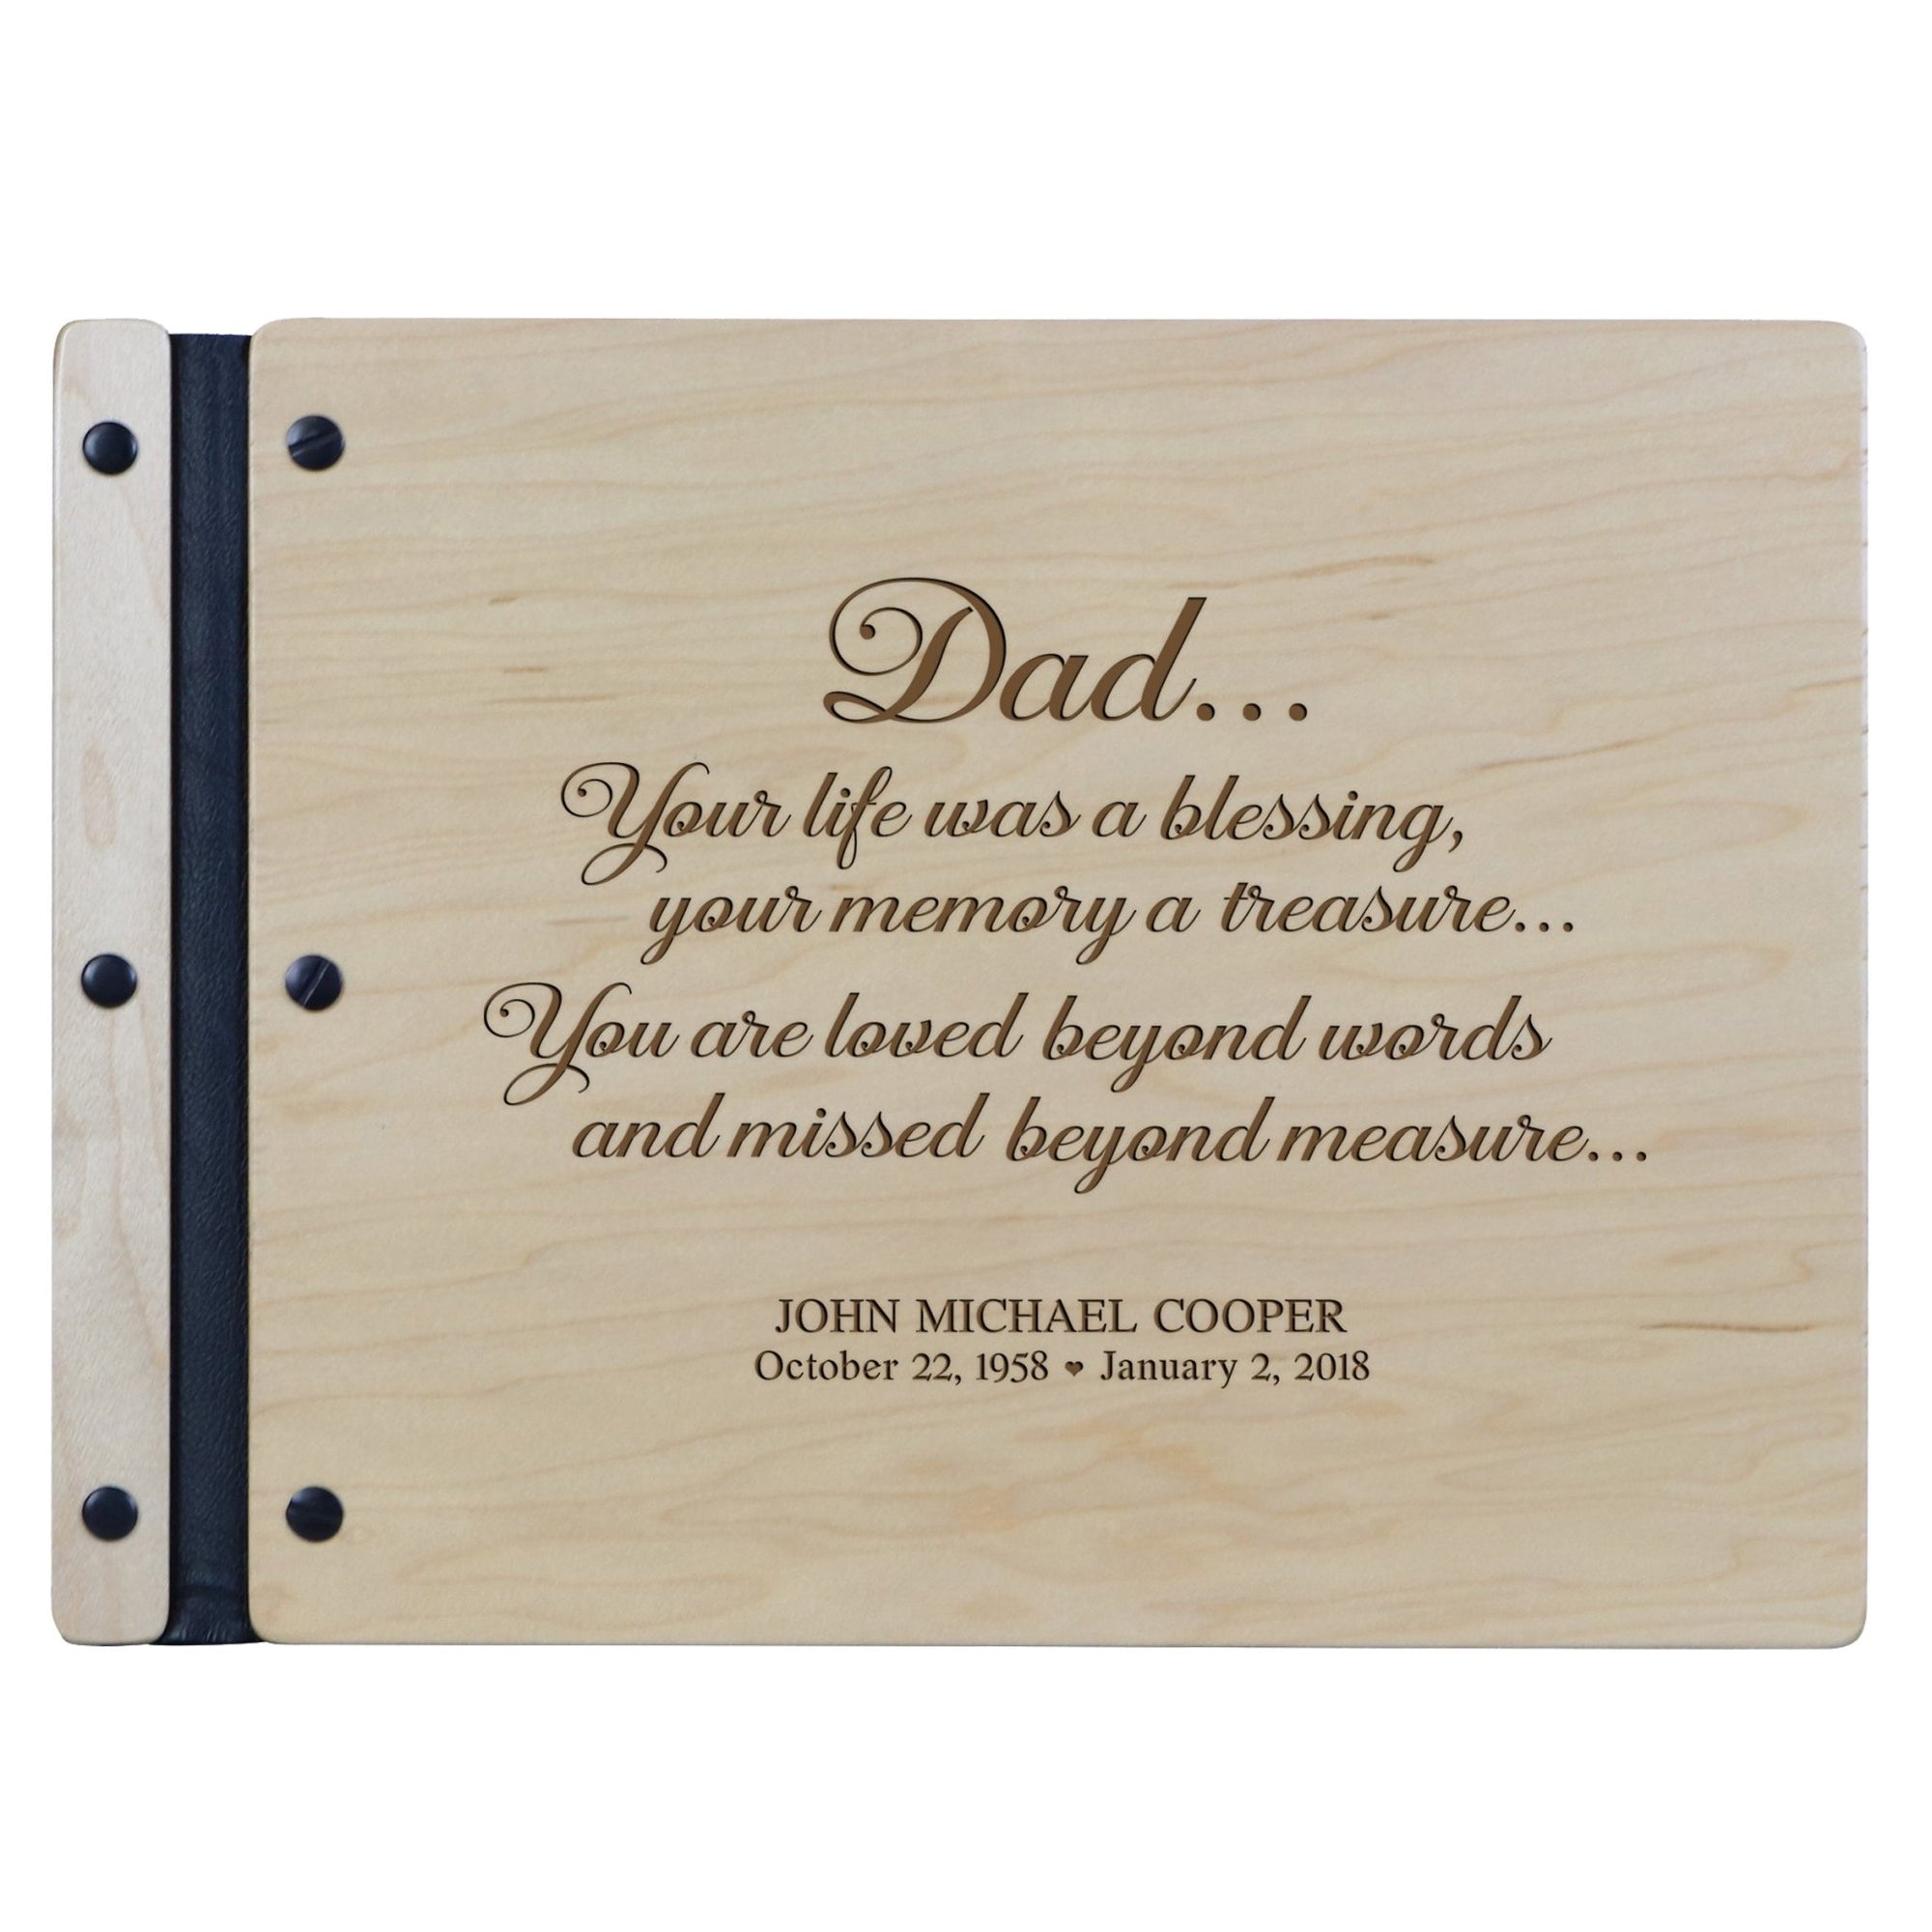 Personalized Memorial Guest Book - Dad - LifeSong Milestones